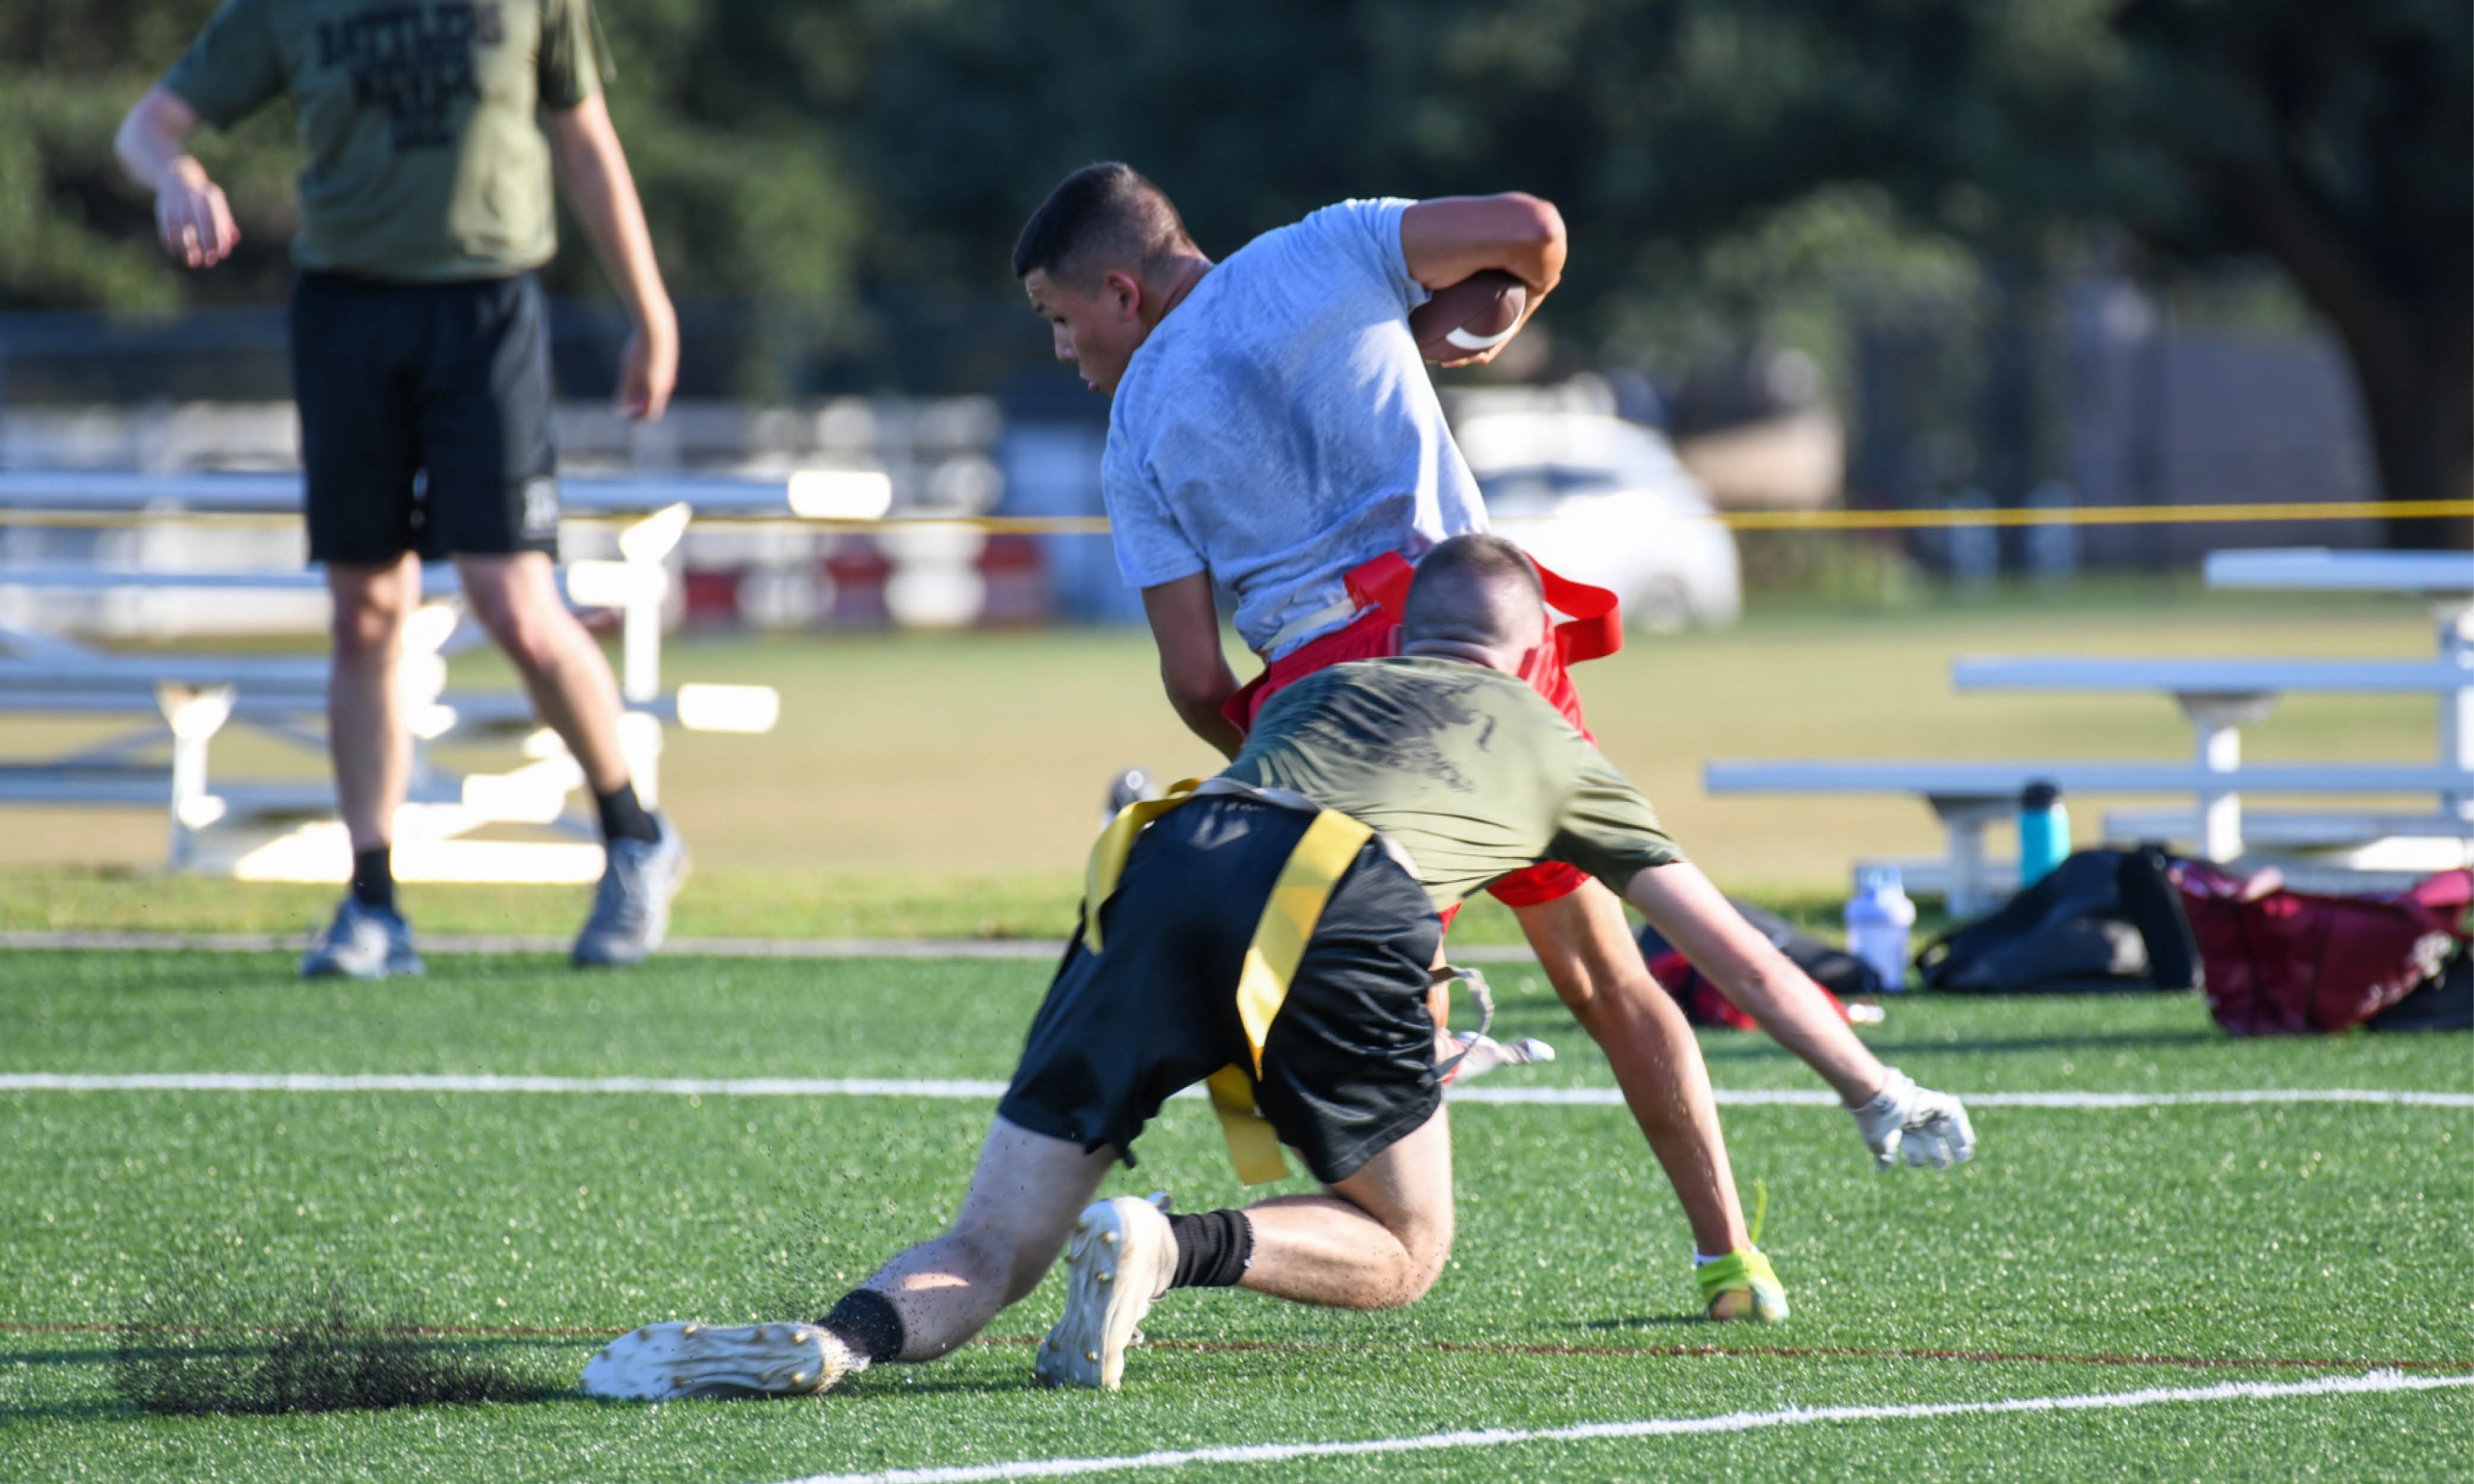 Player making a grab for a football in game of flag football.